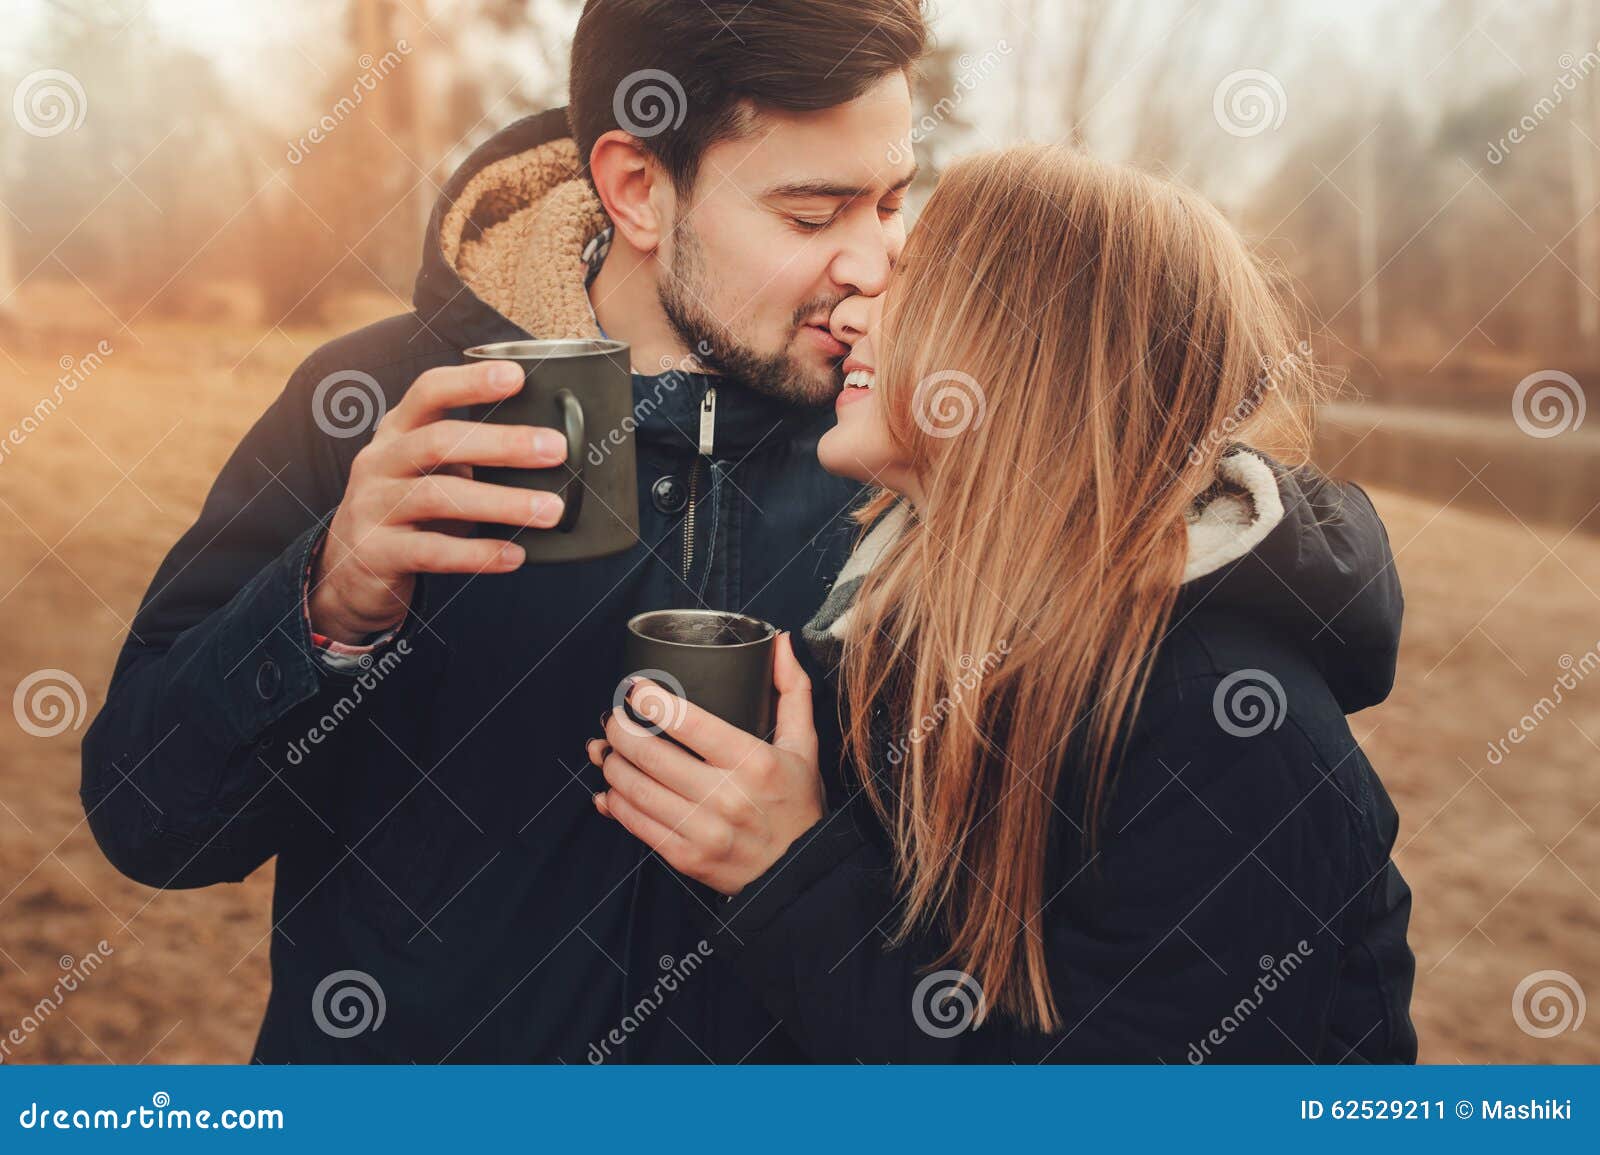 lifestyle capture of happy couple drinking hot tea outdoor on cozy warm walk in forest